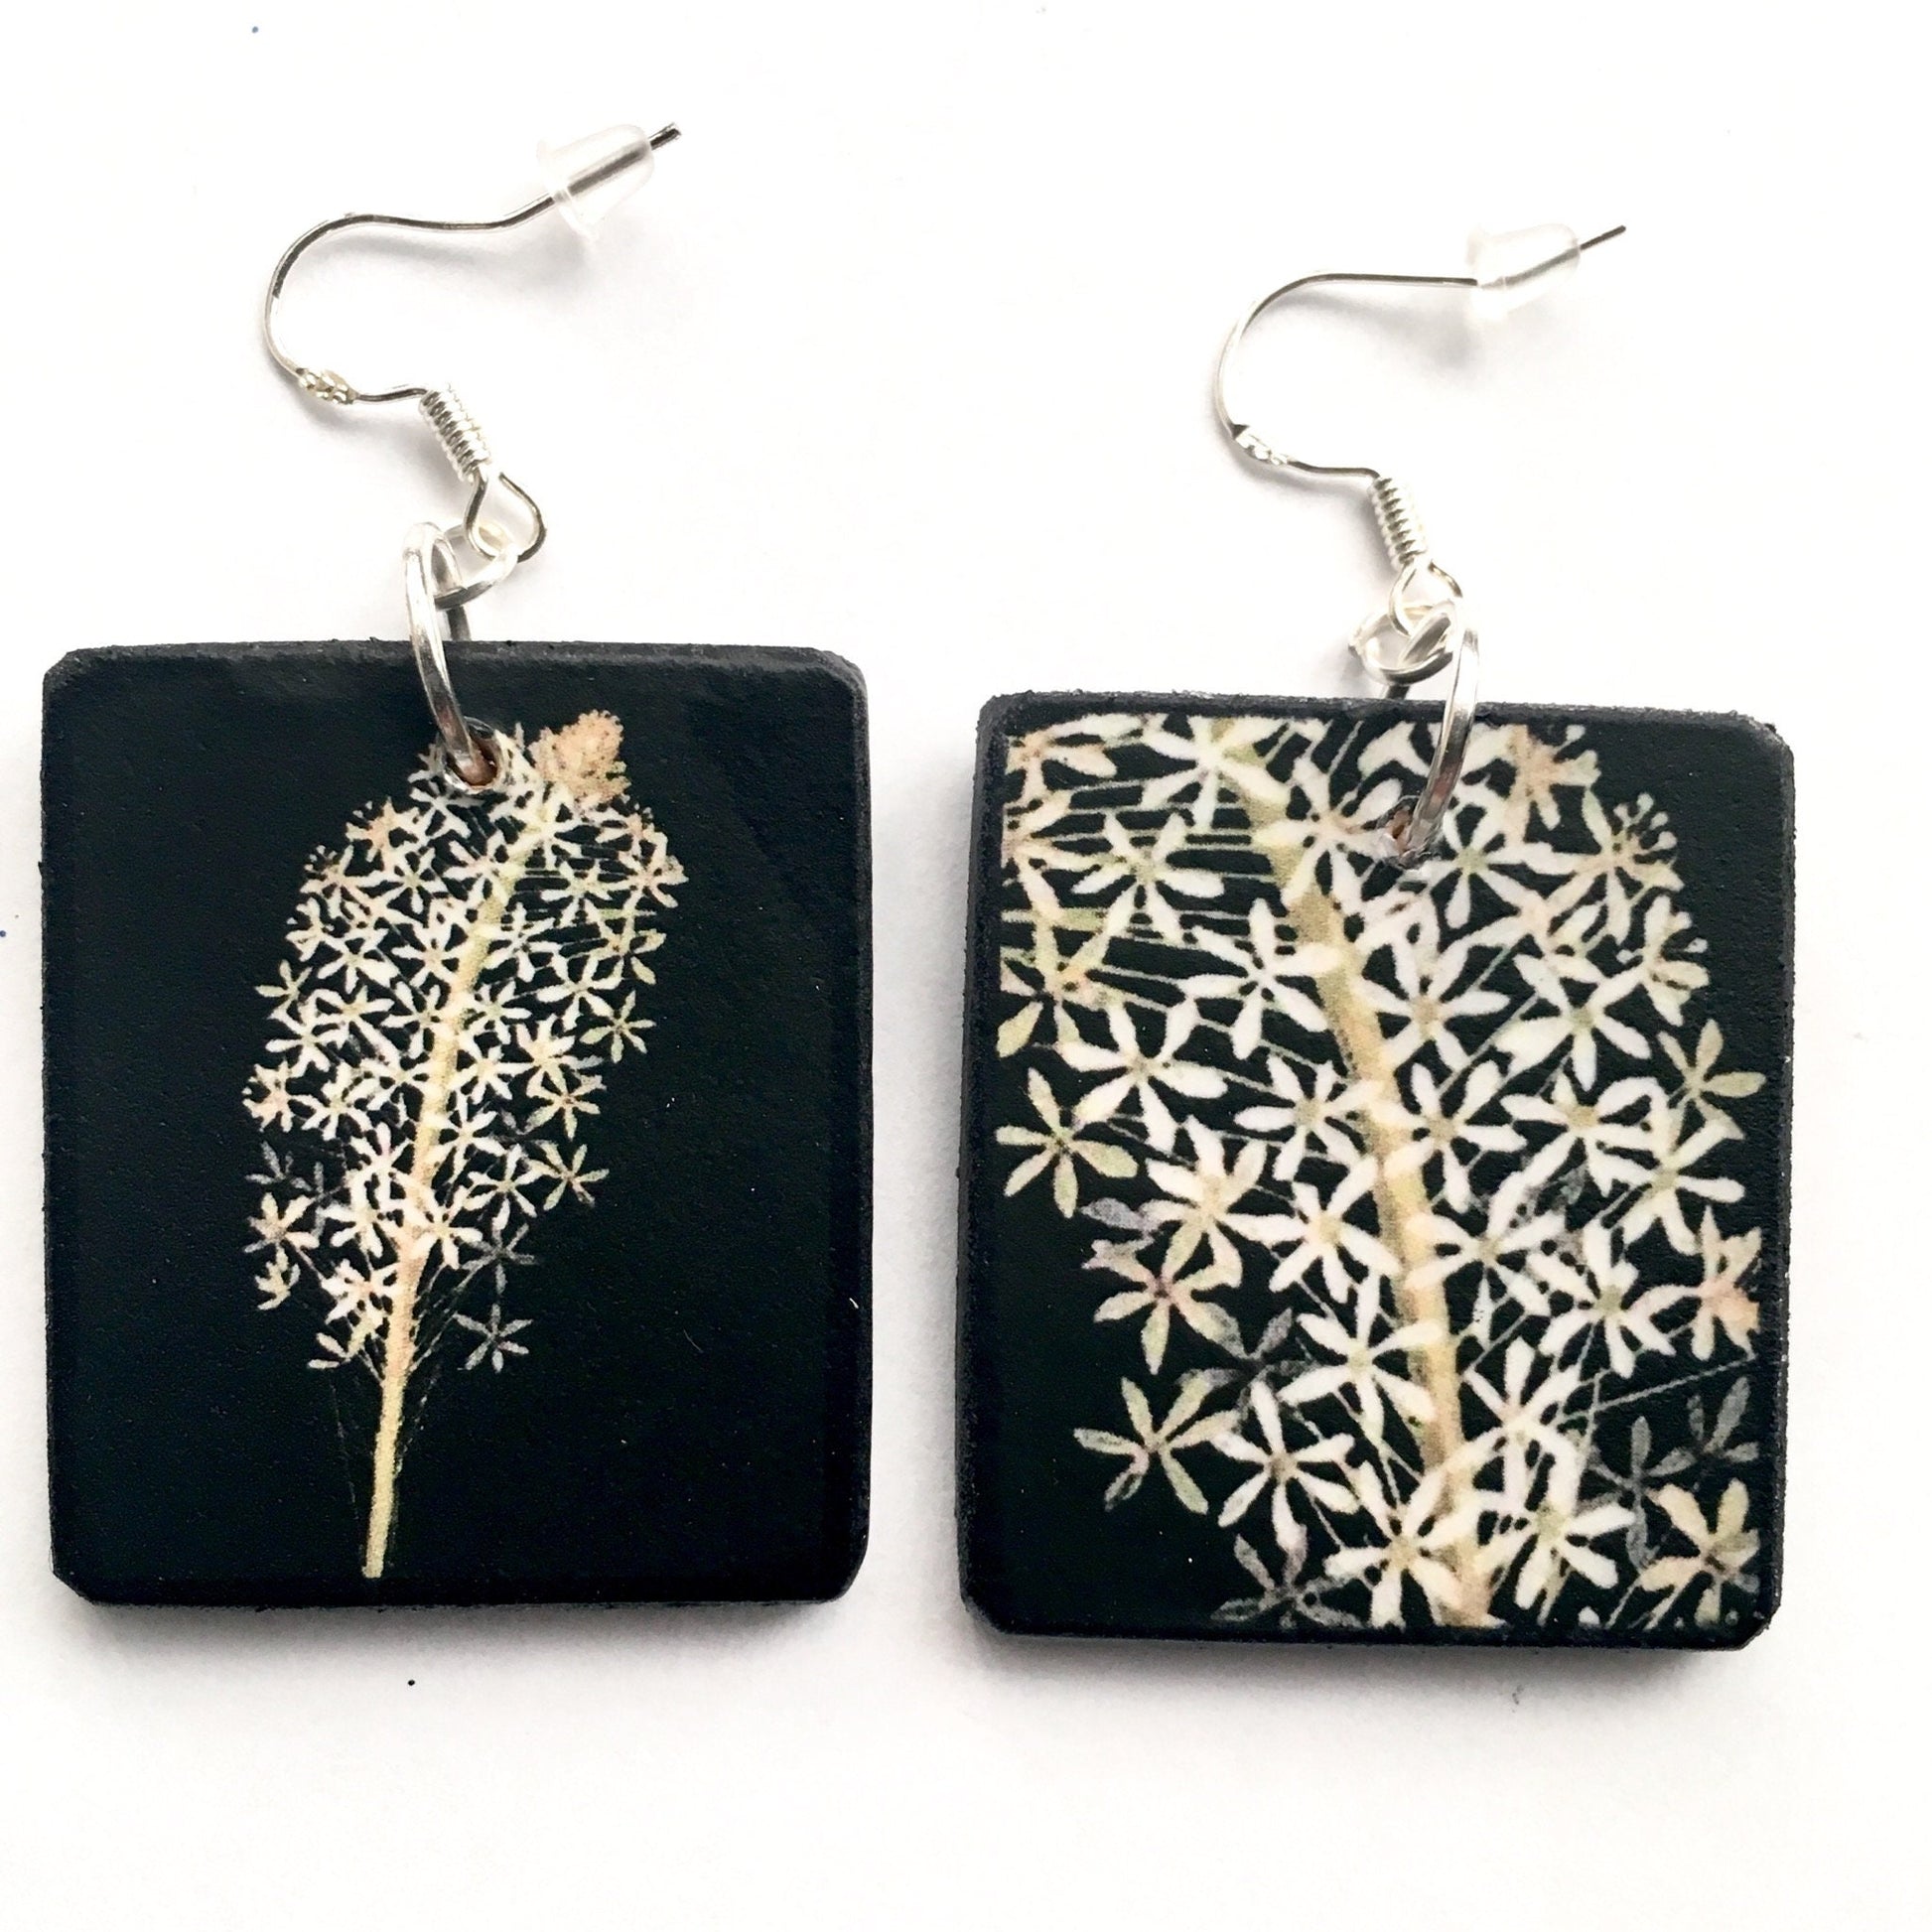 Obljewellery sustainable art earrings. These aesthetic earrings are on wood in black and white flowers  a botanical artwork by Mary Delany. The earings are an artsy gift for her.